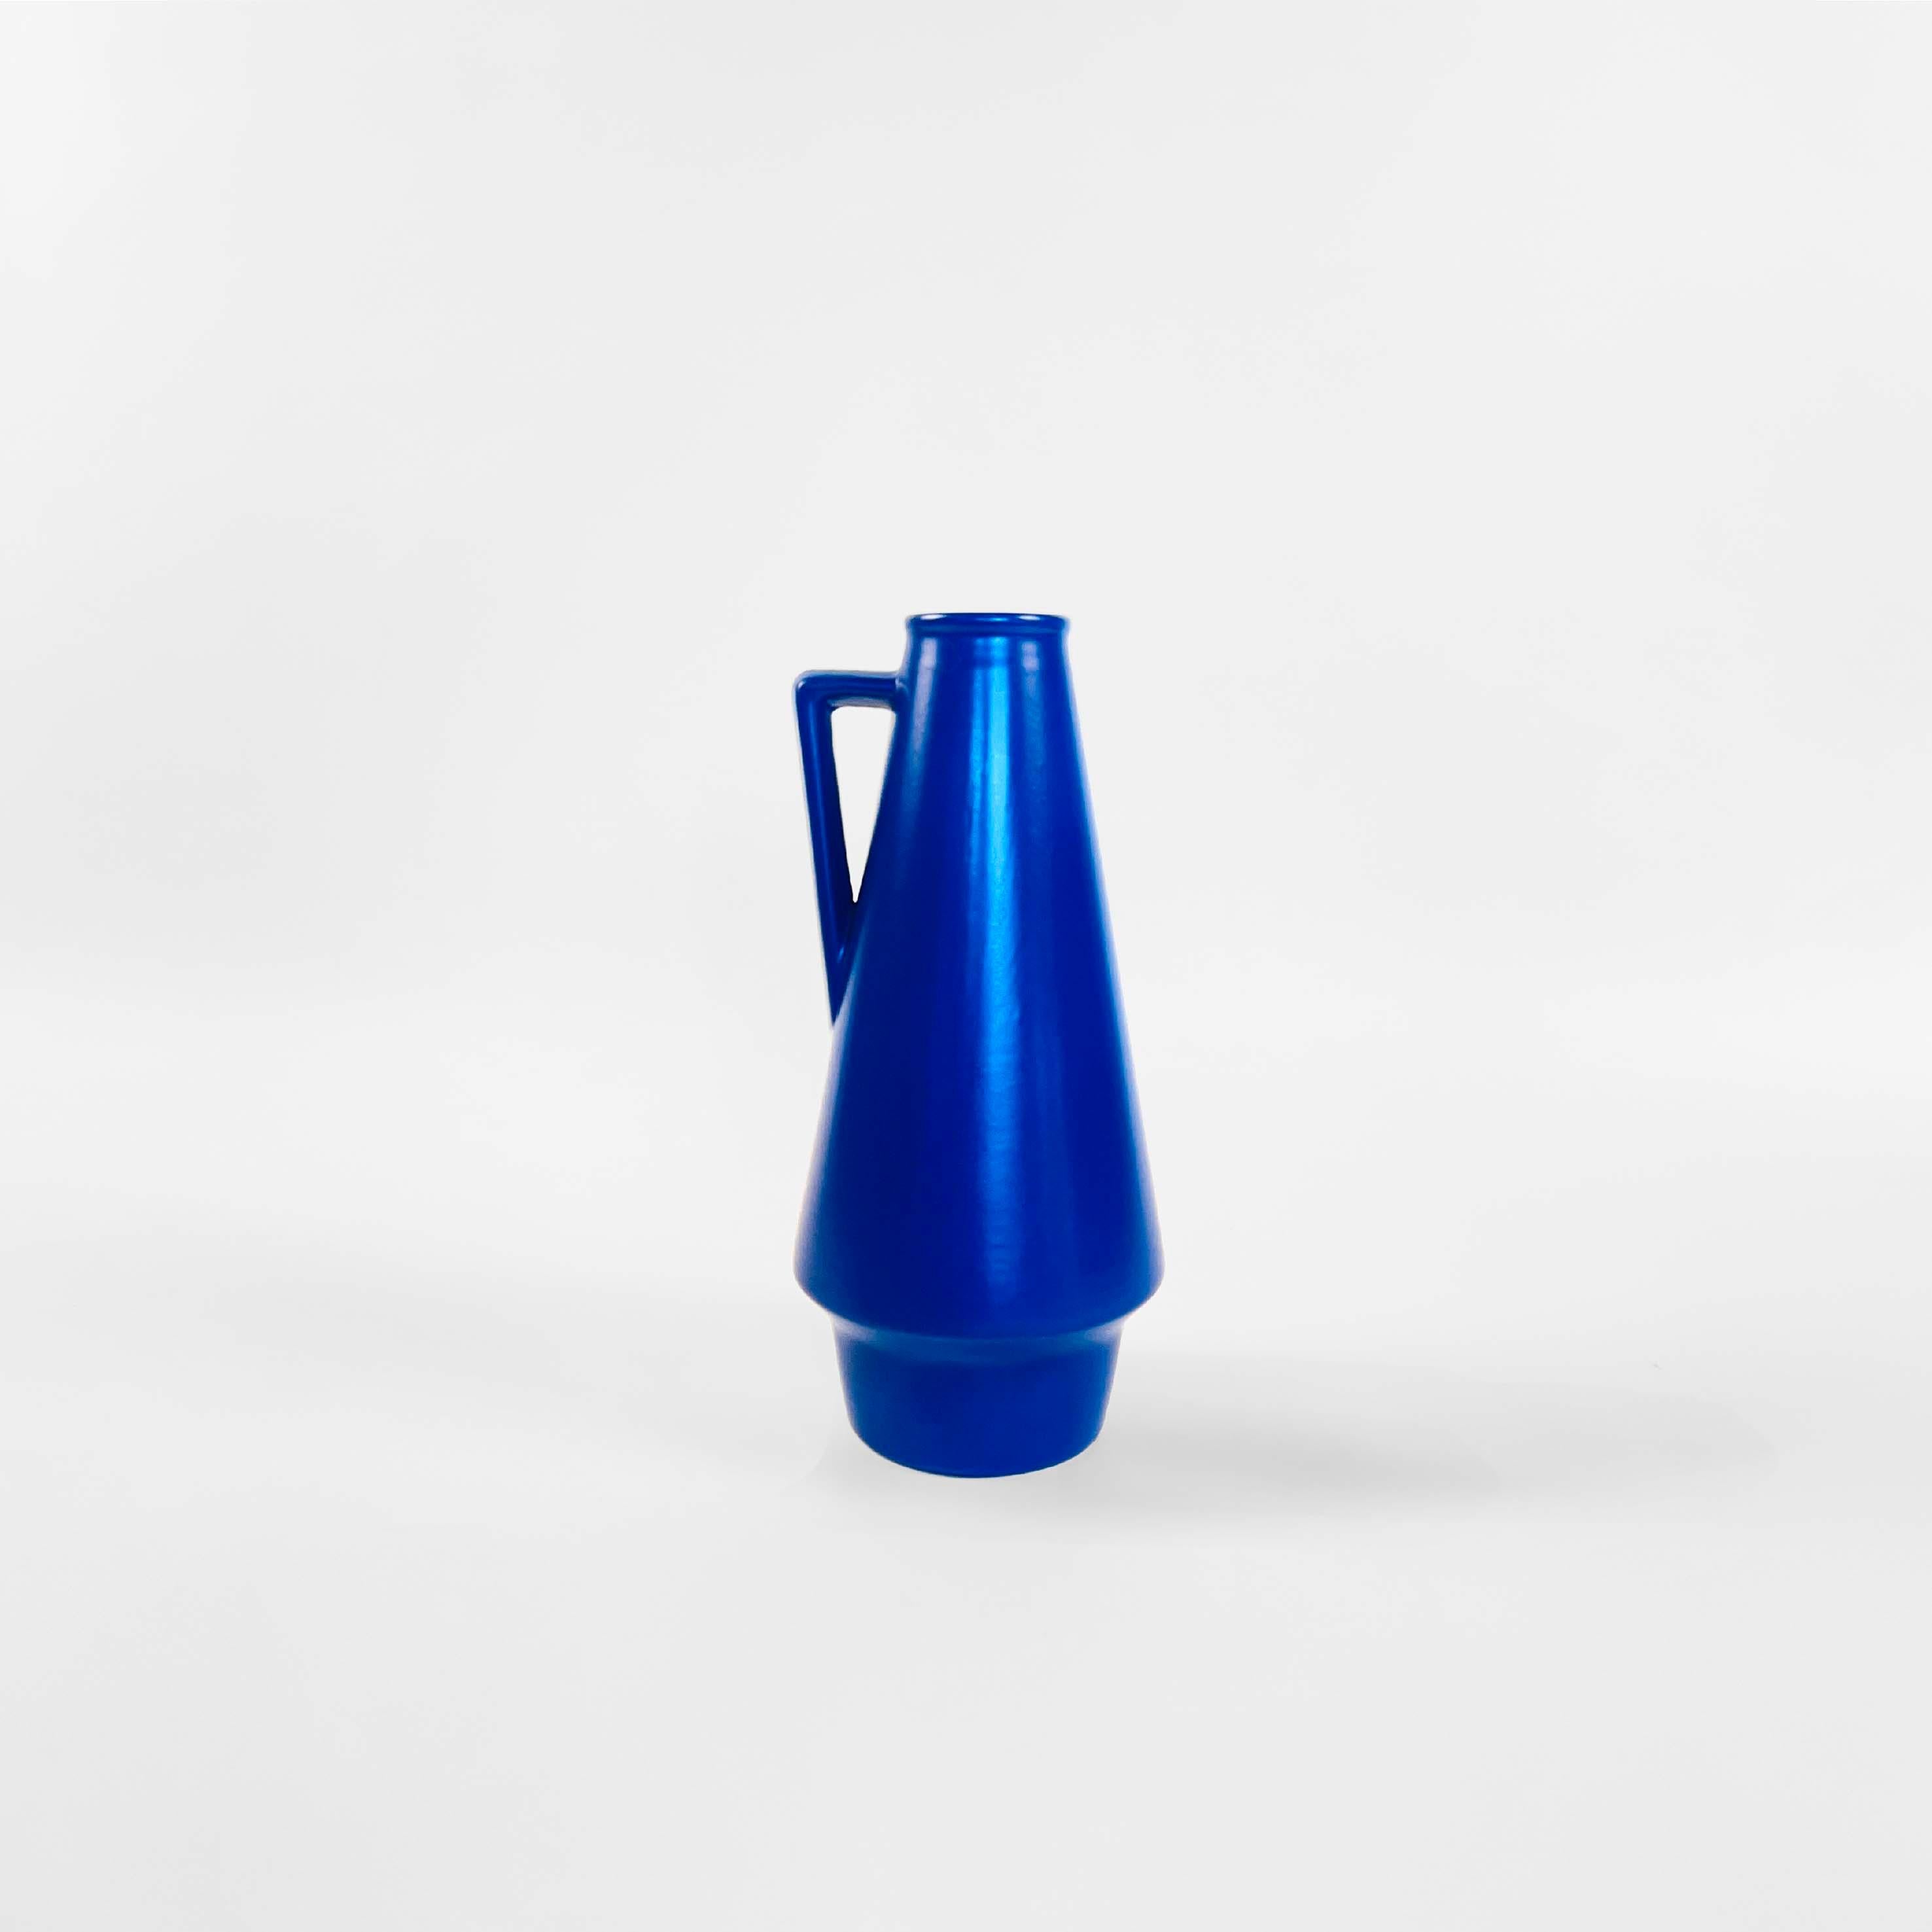 Pottery Vase in Klein Blue. Conical shape with triangular shape handle. Germany 1960s.